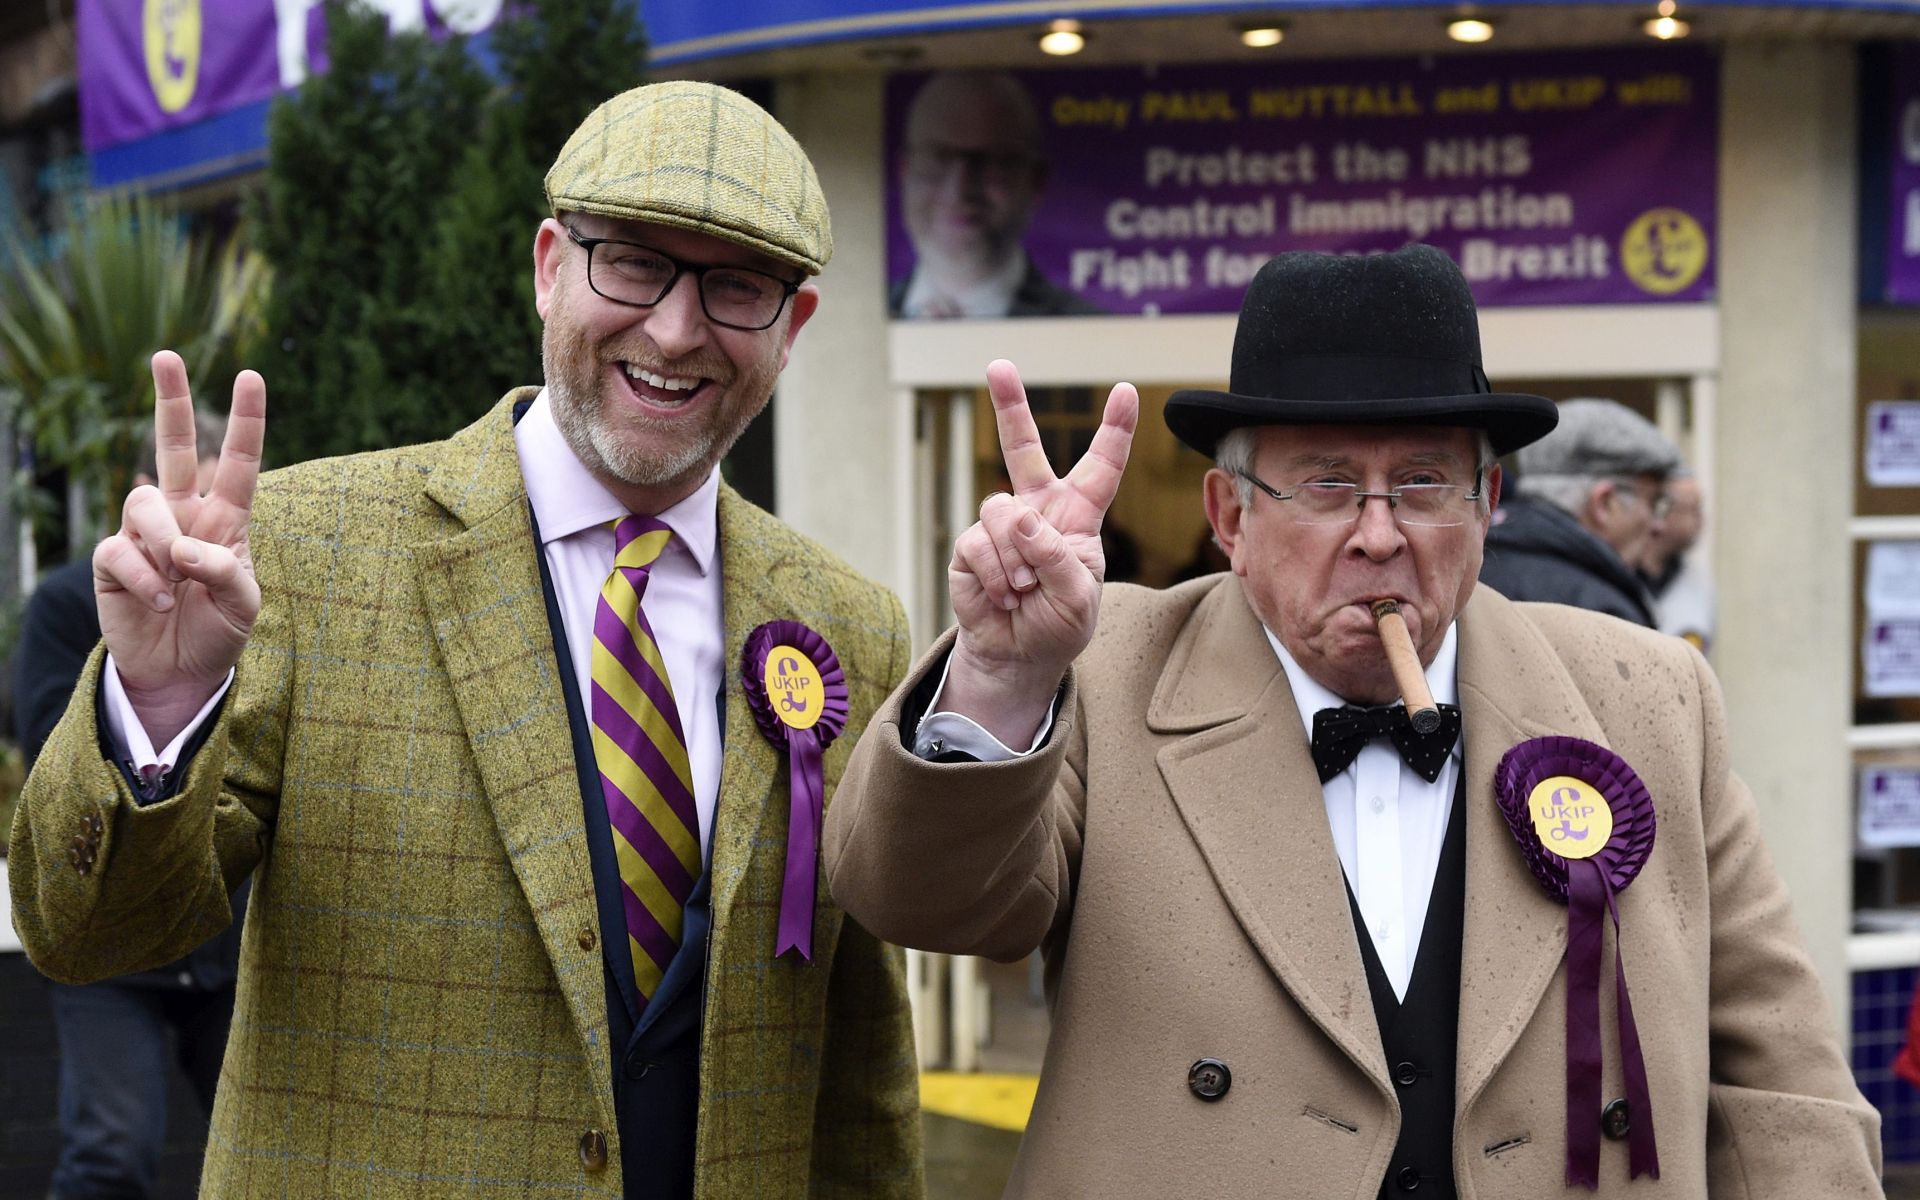 epa05756470 Paul Nuttall (L), leader of UK Independence Party (UKIP) and candidate for Stoke-on-Trent central, poses with a supporter as he launches his campaign in Stoke-on-Trent, Britain, 28 January 2017. Voters will head to the polls in the Stoke-on-Trent Central by-election on 23 February 2017.  EPA/FACUNDO ARRIZABALAGA